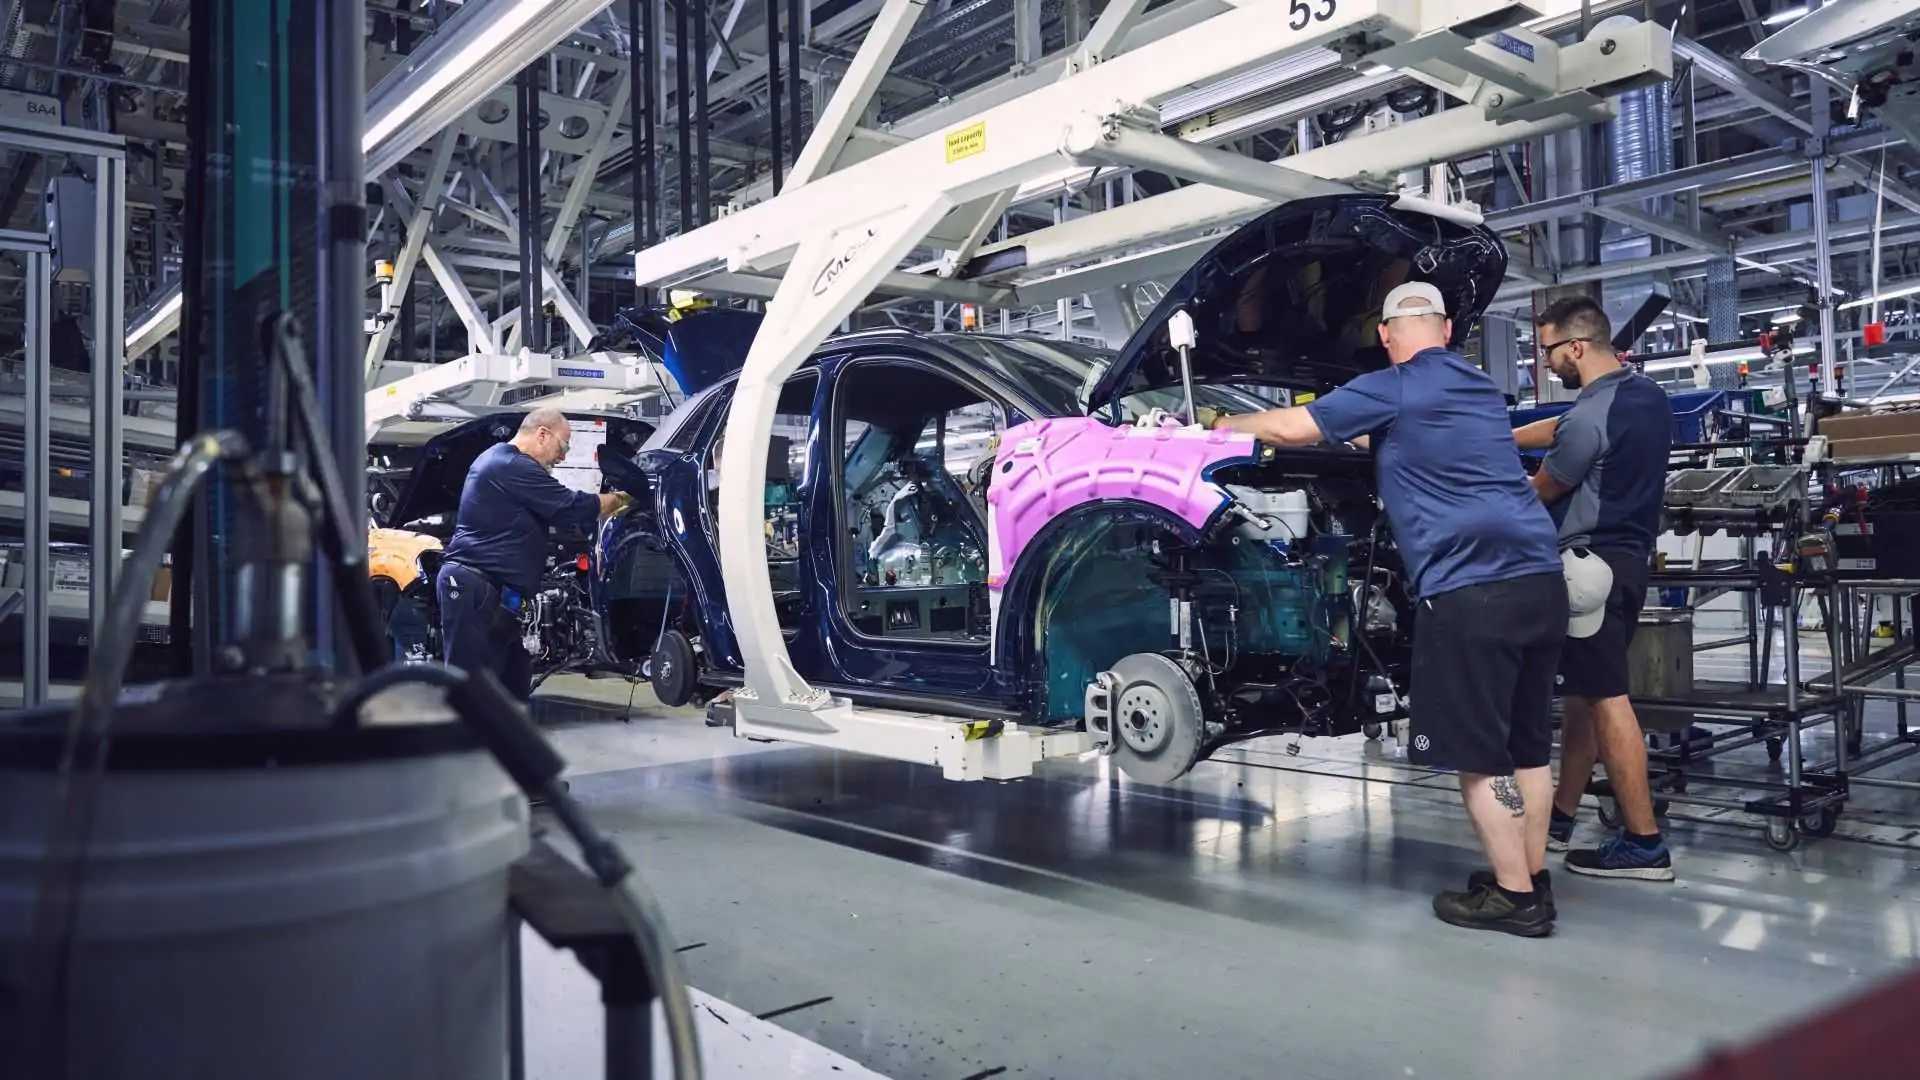 volkswagen mexico will build evs for the u.s. market